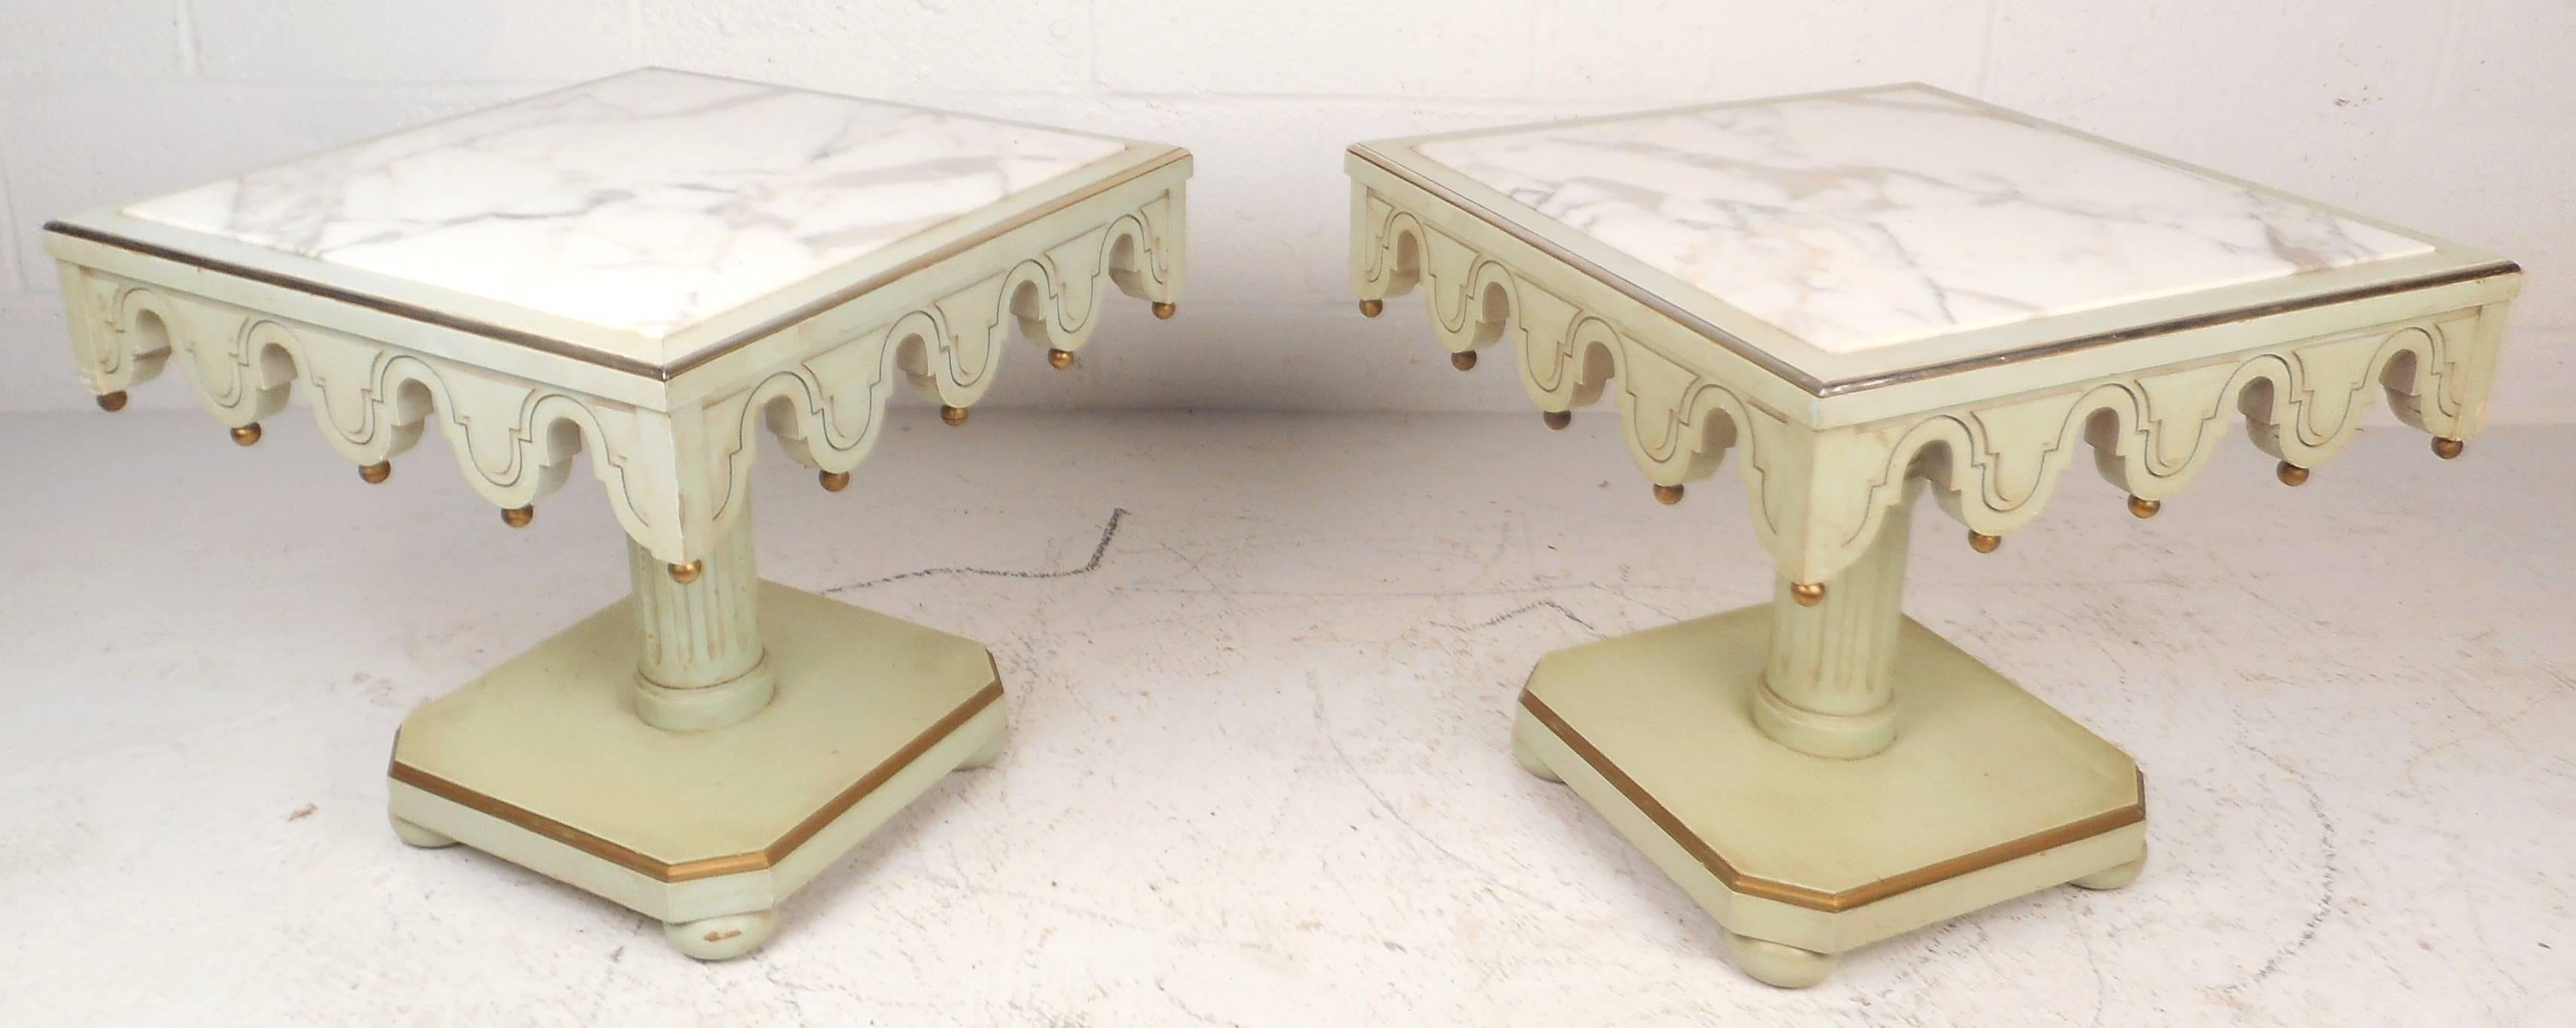 Wonderful pair of Mid-Century Hollywood Regency style end tables featuring unique sculpted and etched draping designs around a white marble top. Unique fluted centre pedestal supports and decorative brass hanging fixtures add style and grace to any